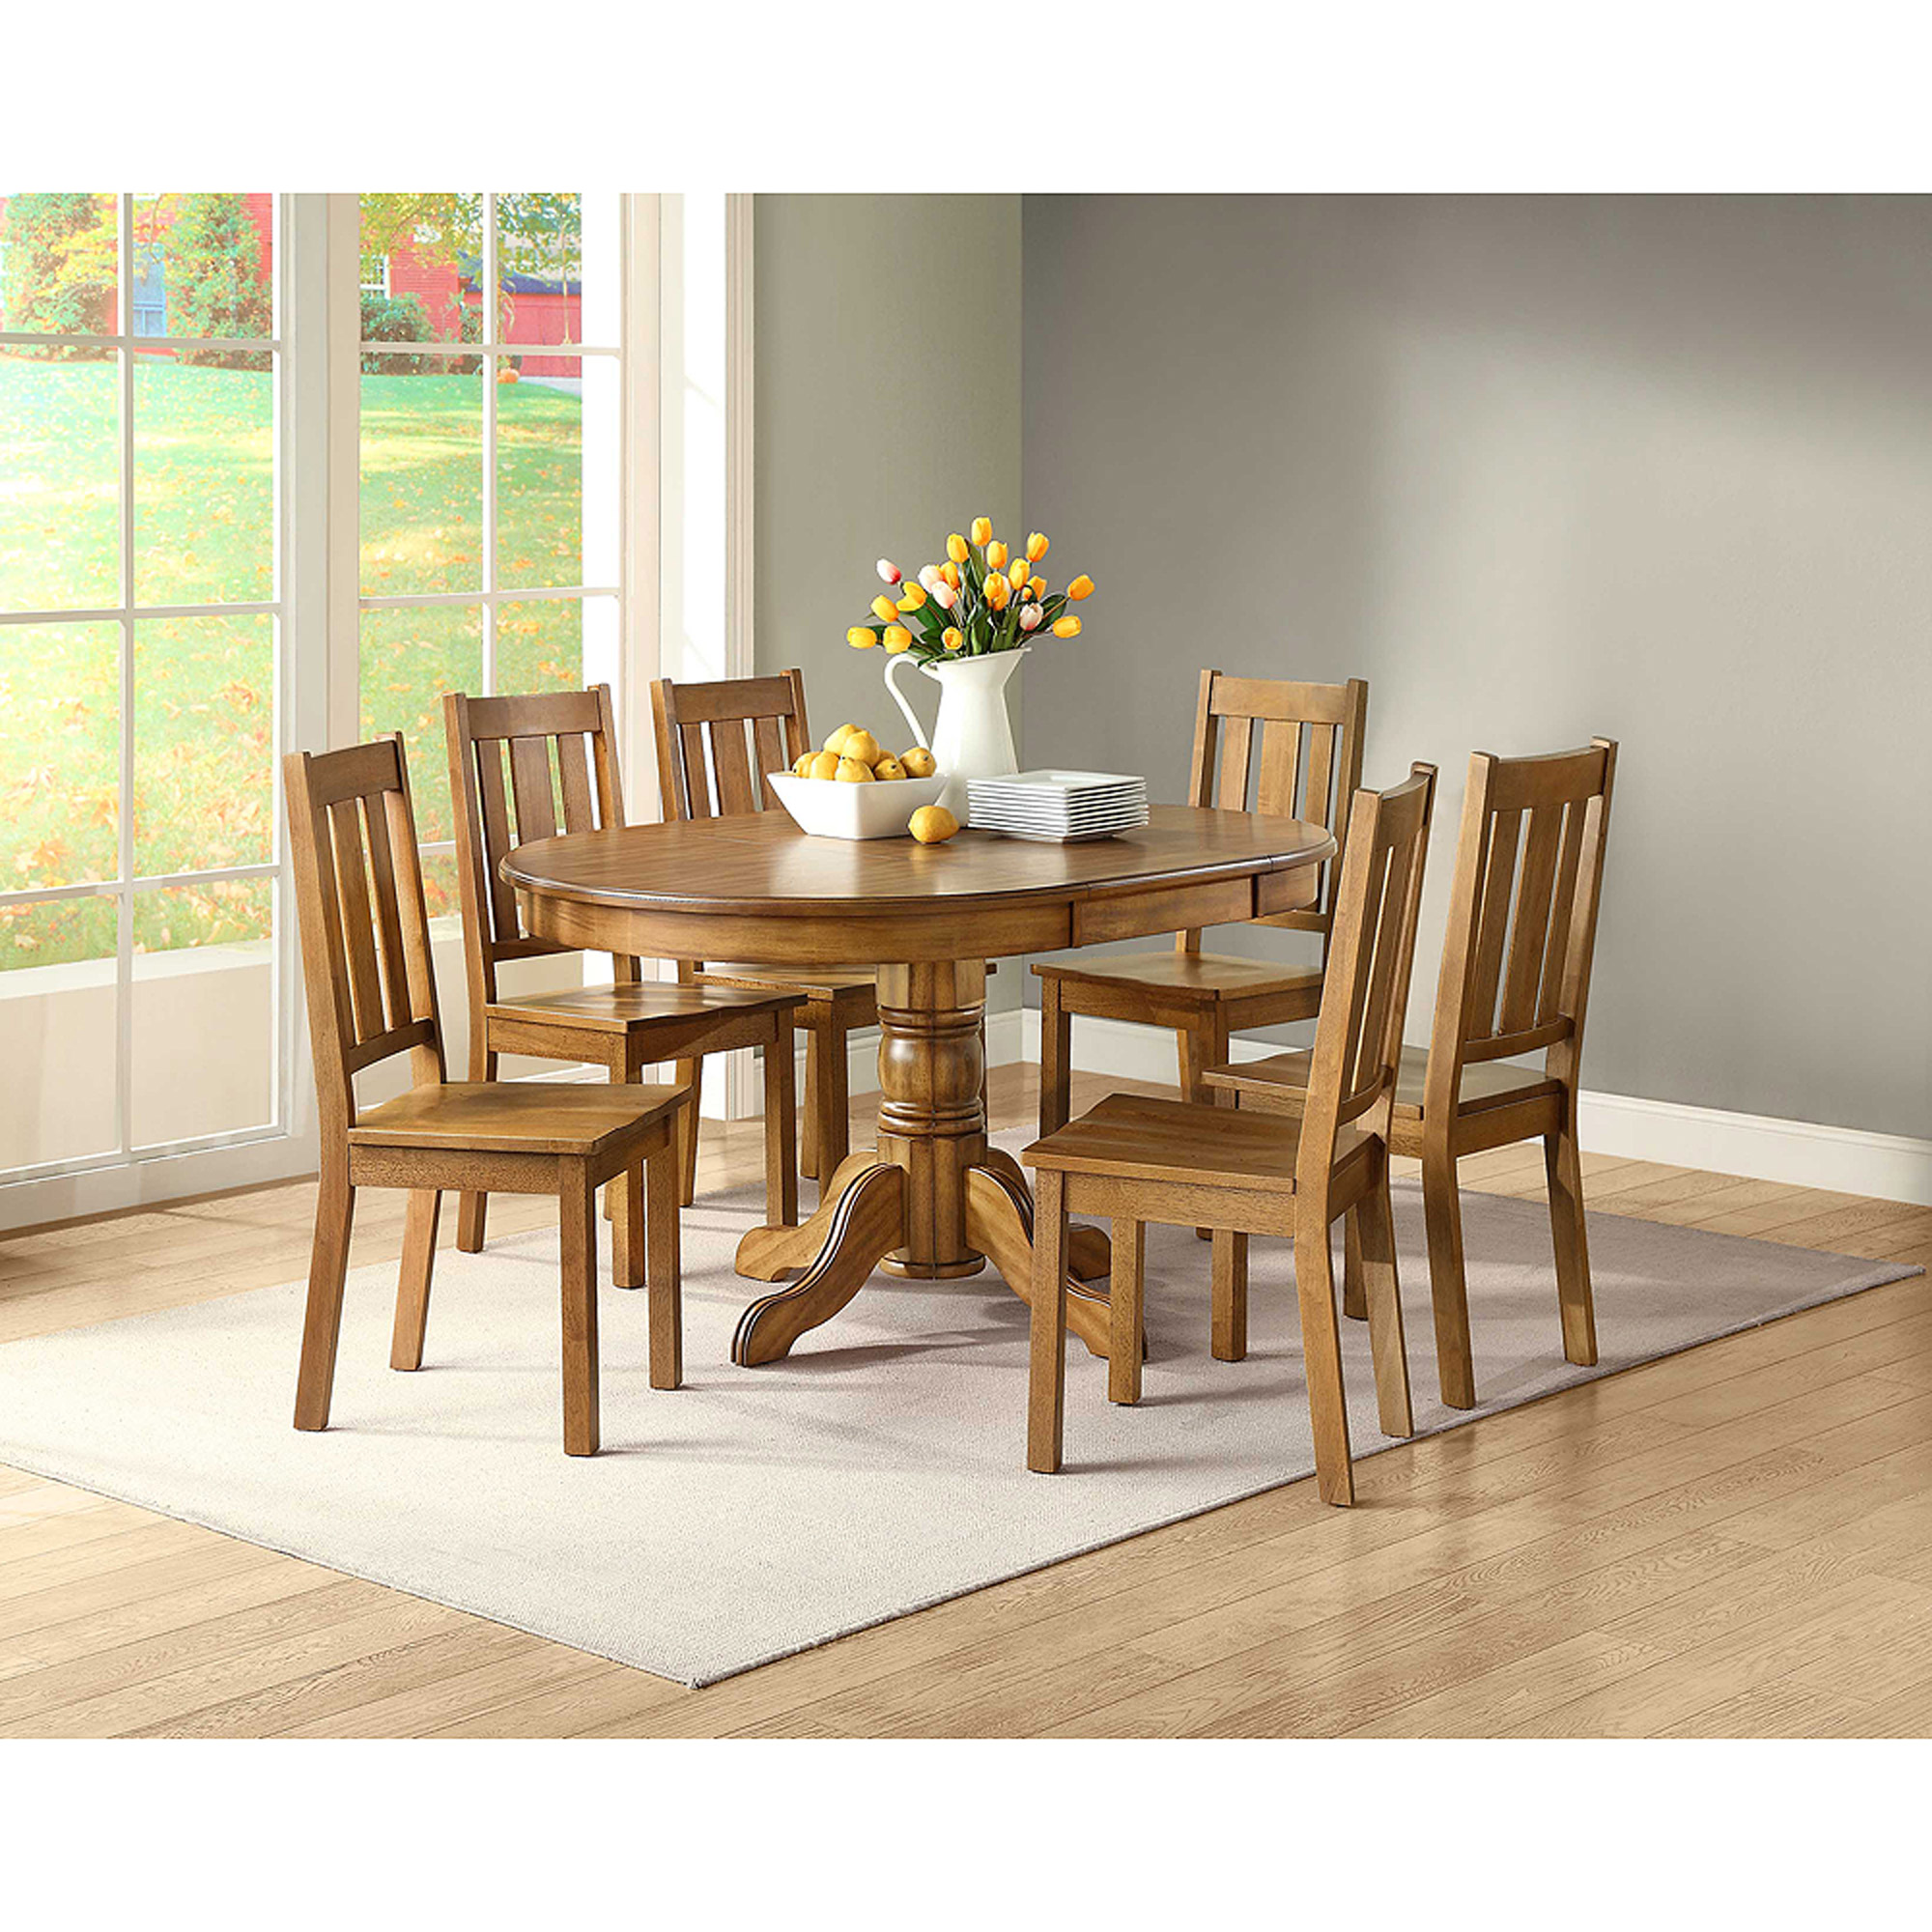 Better Homes and Gardens Cambridge 7-Piece Dining Set, Honey - image 3 of 3